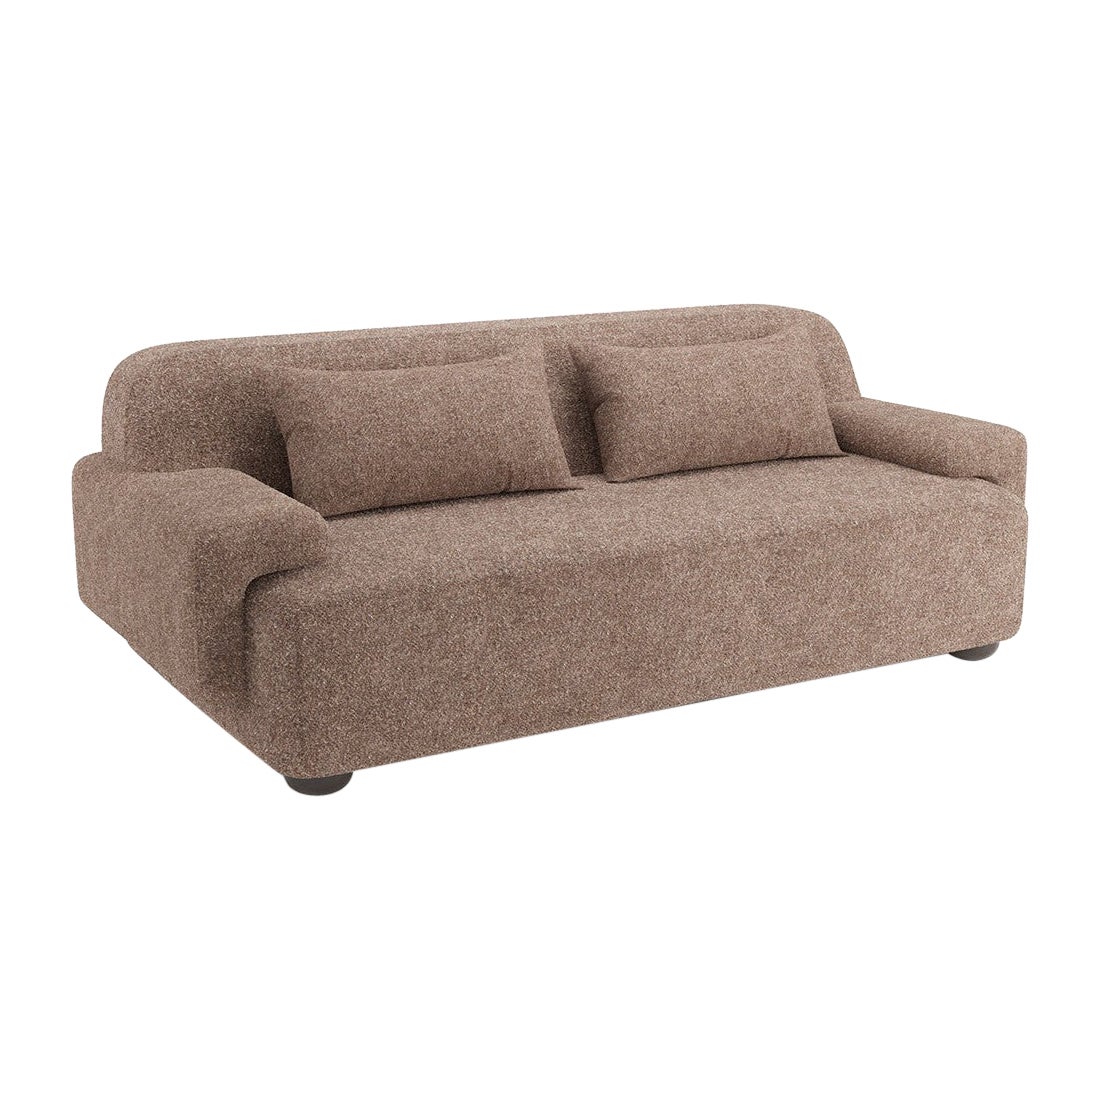 Popus Editions Lena 2.5 Seater Sofa in Mole Taupe Antwerp Linen Upholstery For Sale